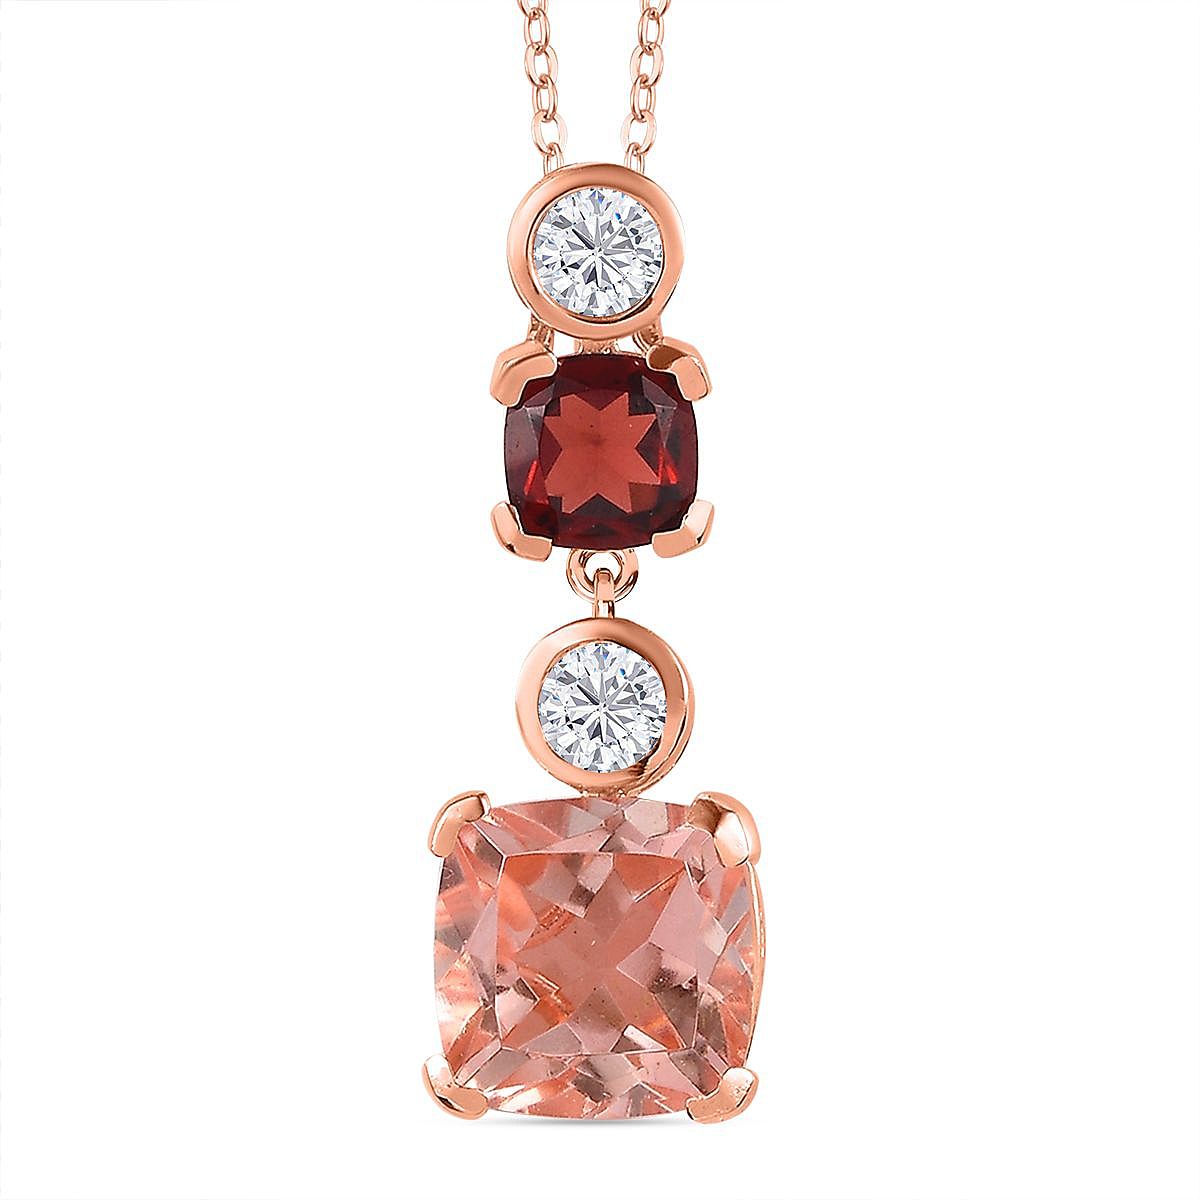 Morganite Color Quartz, Red Garnet & Natural Zircon Pendant with Chain (Size 20) in 18K Rose Gold Vermeil Plated Sterling Silver 7.00 Ct, Silver Wt 5.00 GM